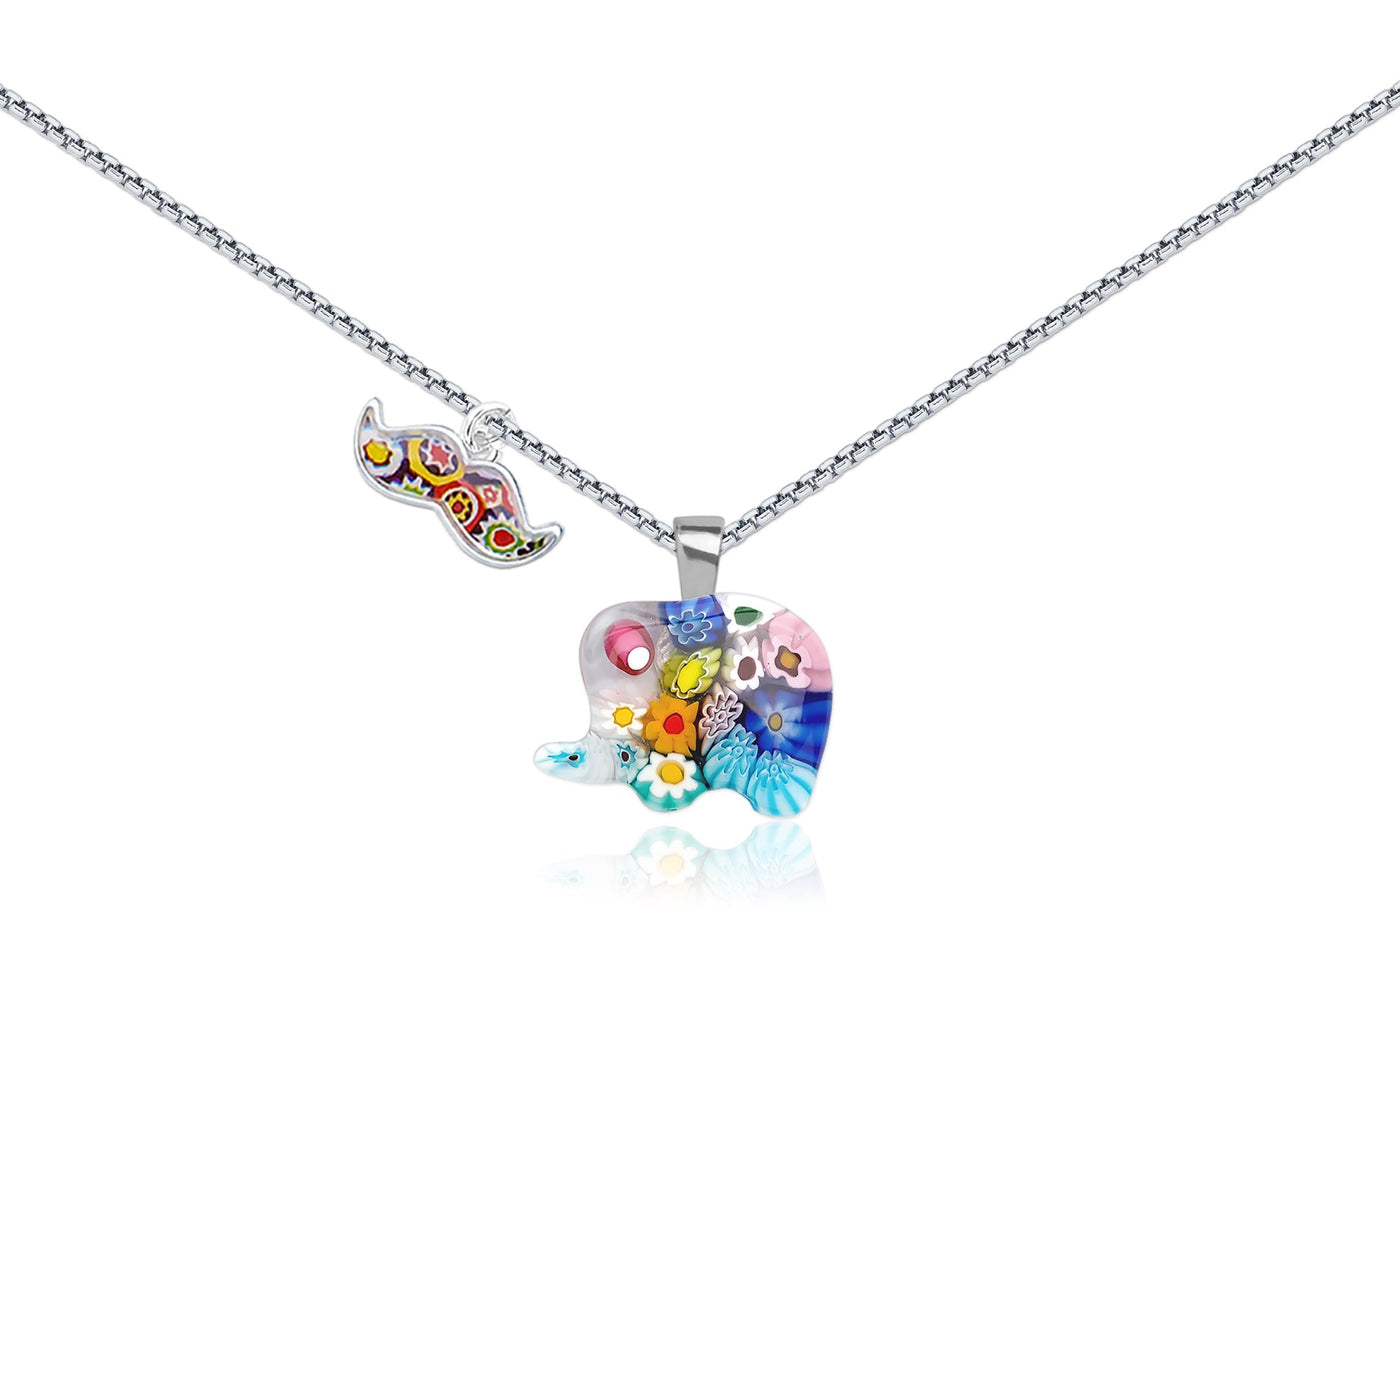 Elephant in Bloom Necklace - 1.3mm Anti-Tarnish Silver [+USD25.00] - Pendant Necklace